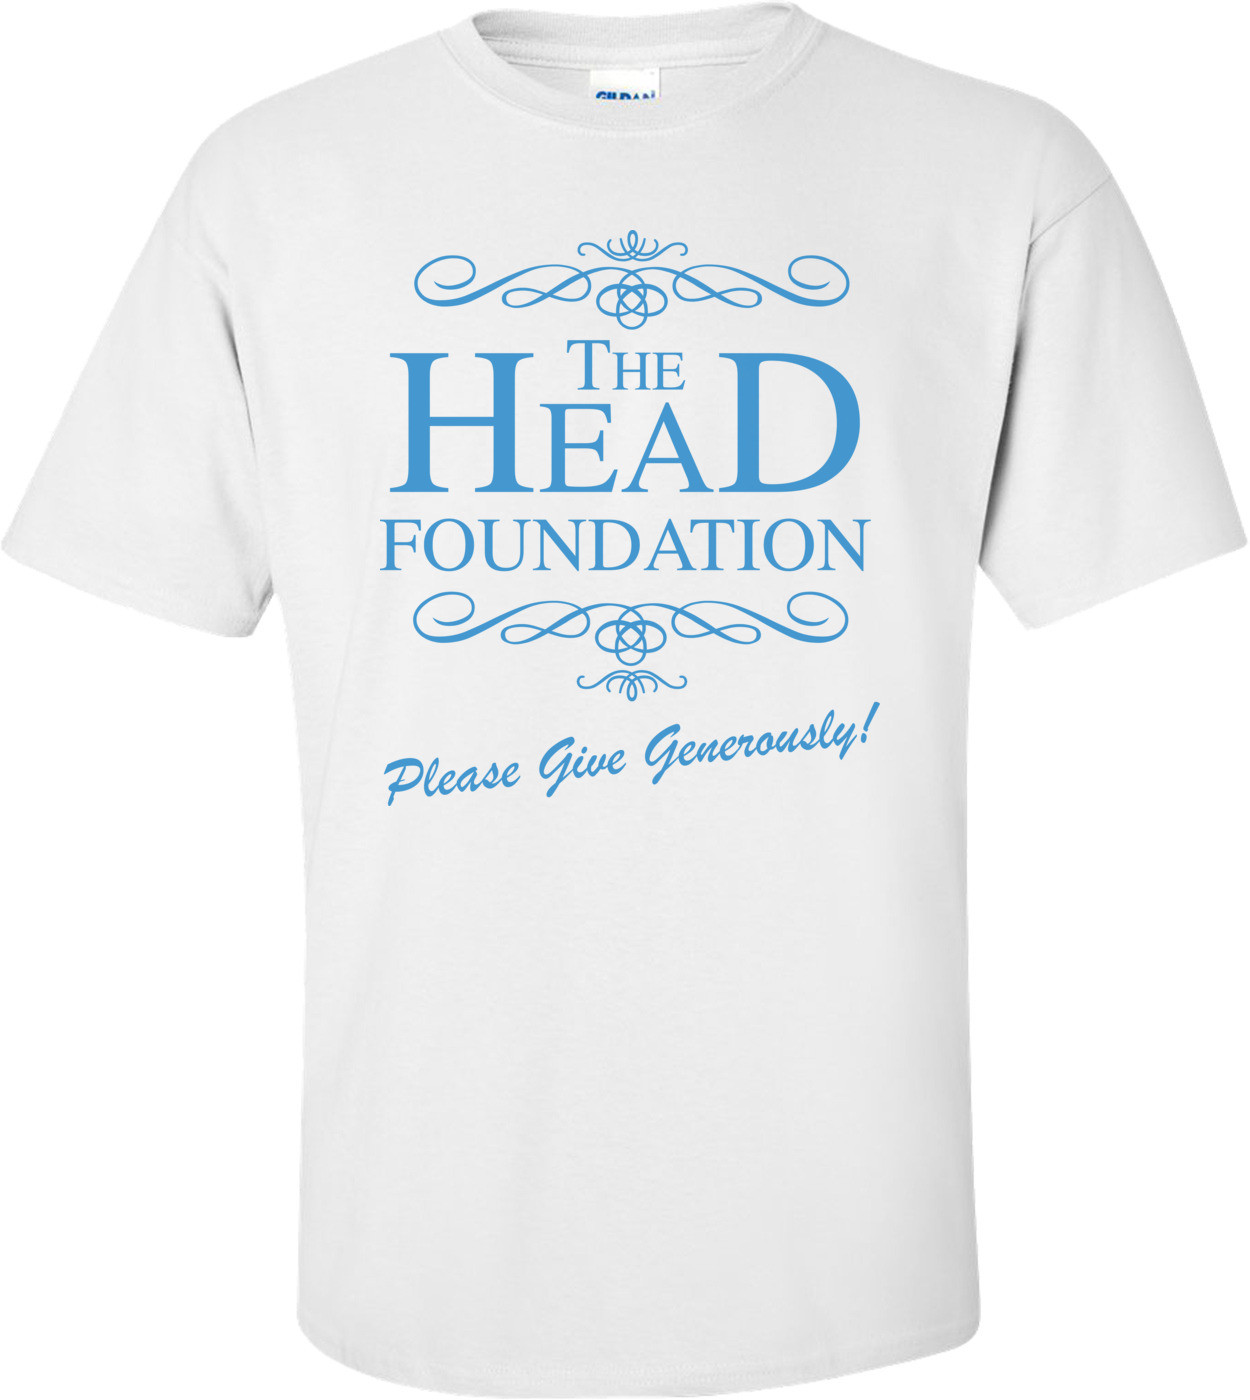 The Head Foundation Please Give Generously 